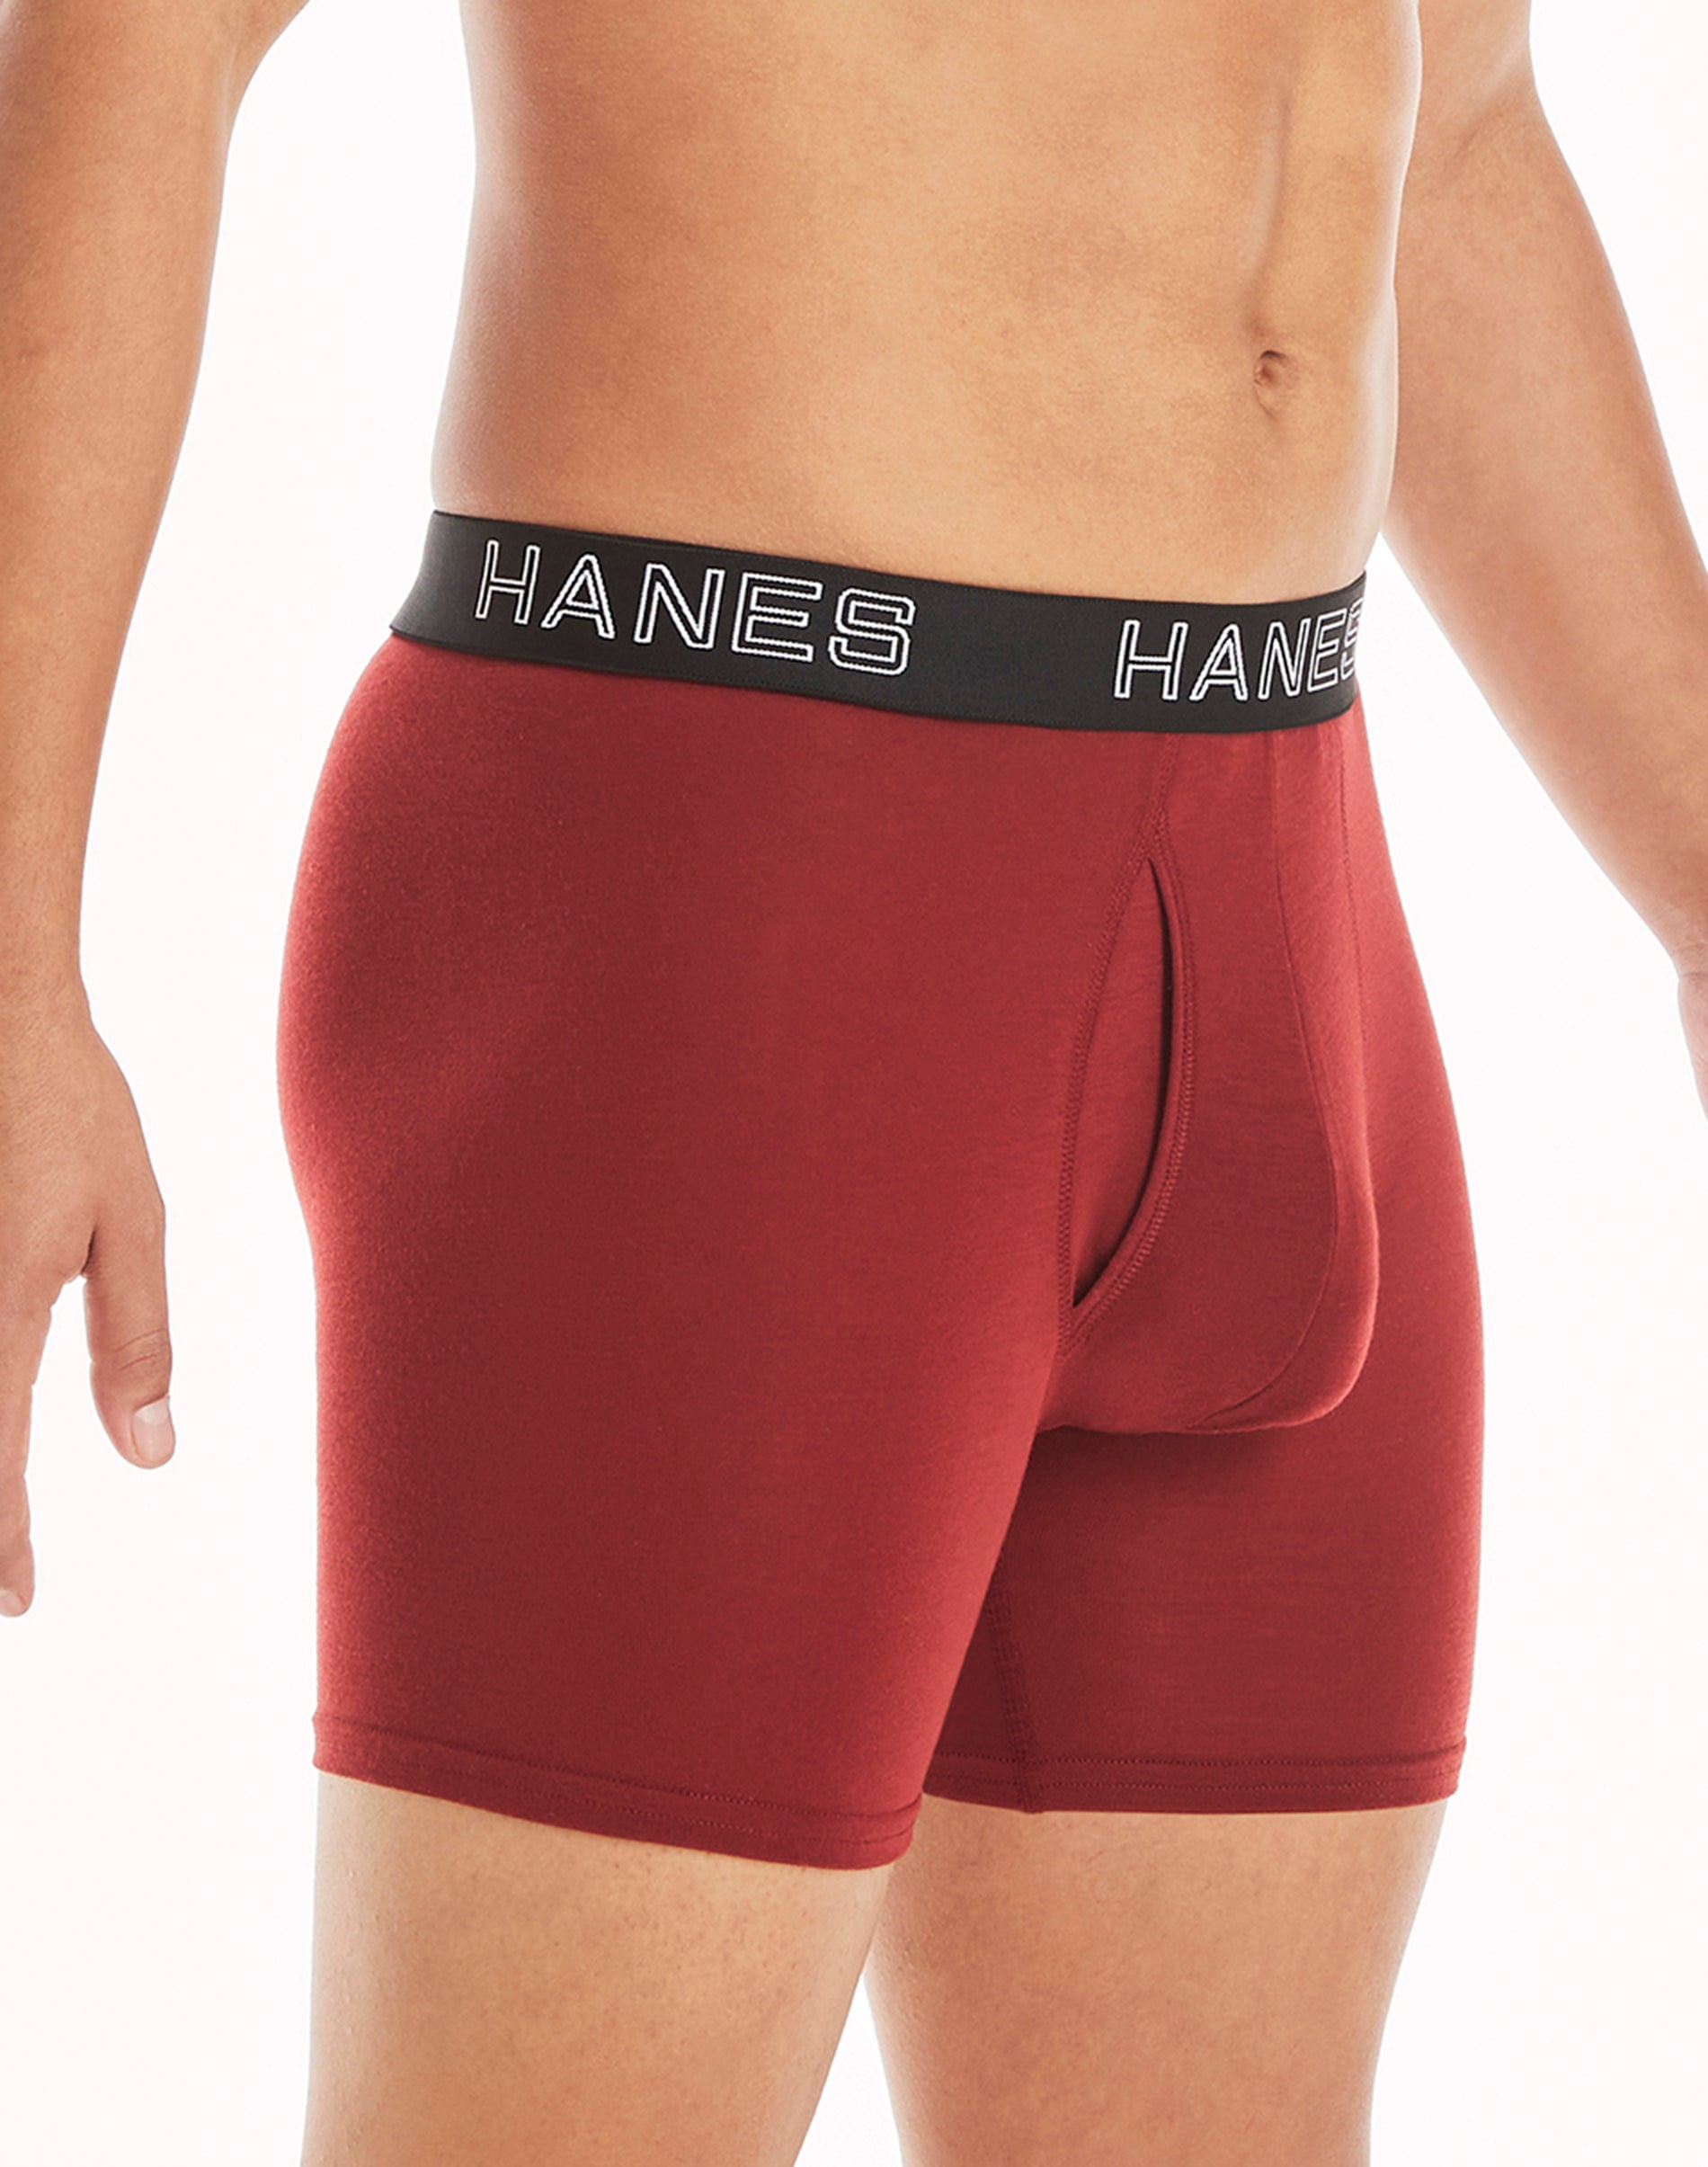 Hanes Ultimate Comfort Flex Fit Total Support Pouch Men's Boxer Brief  Underwear, Red/Blue/Black/Grey, 4-Pack Assorted S 